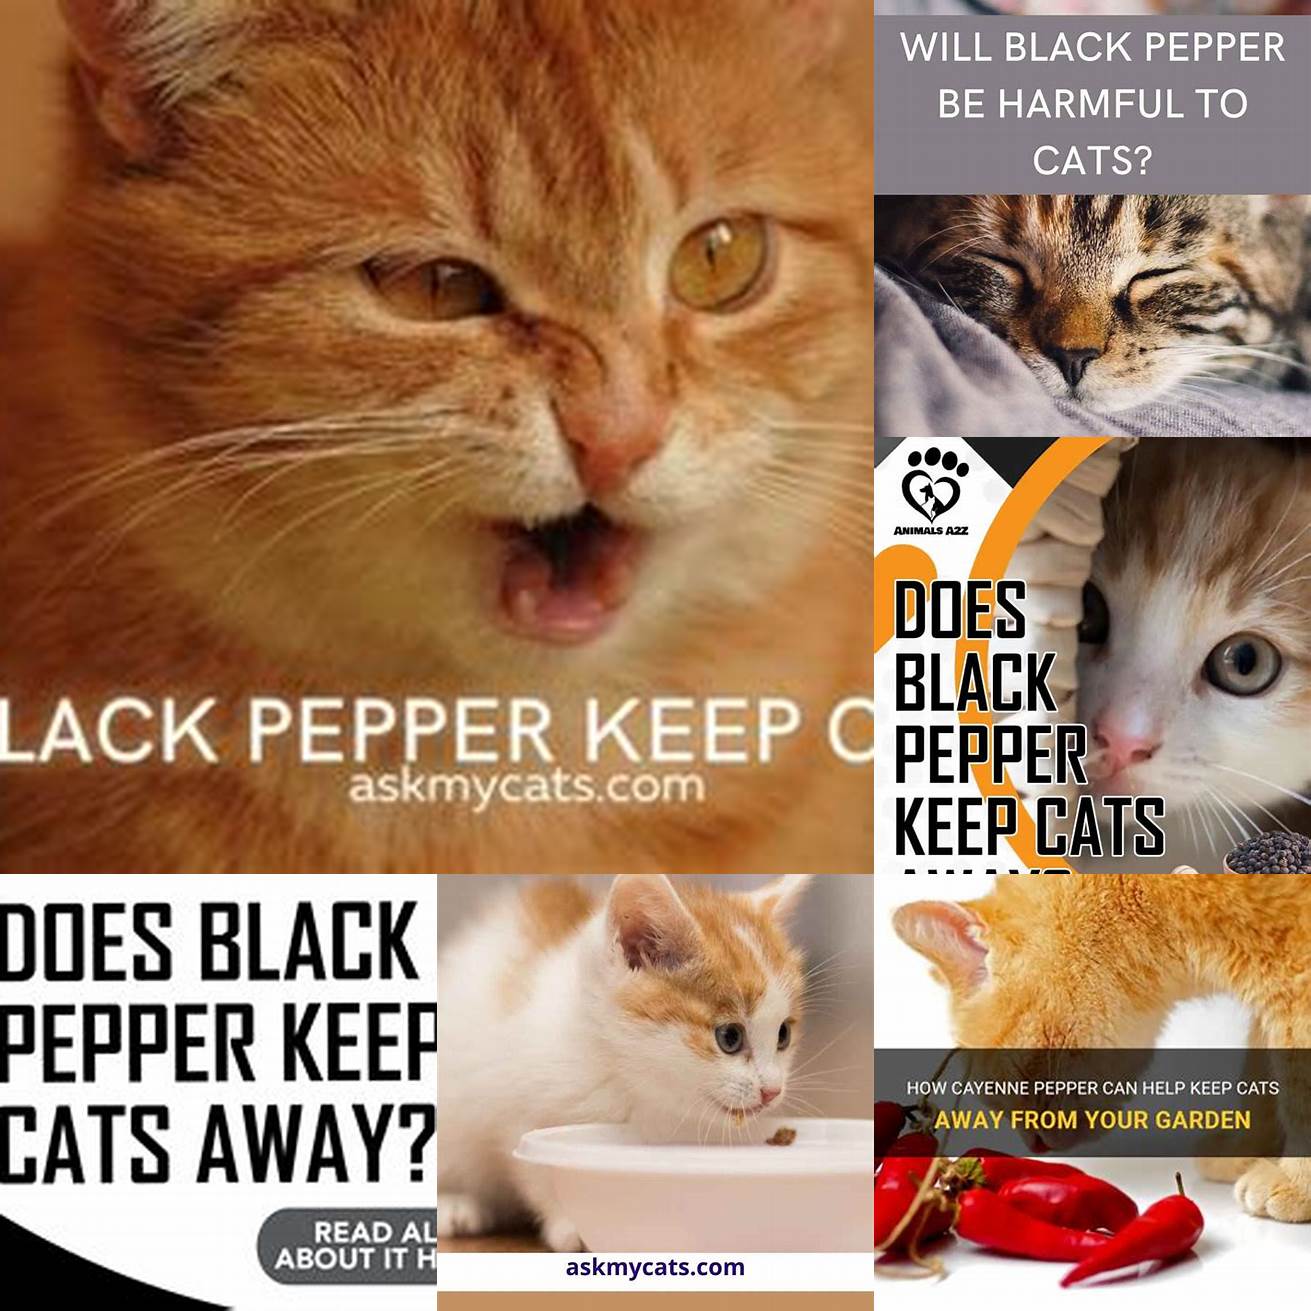 Keep Black Pepper Away from Your Cat